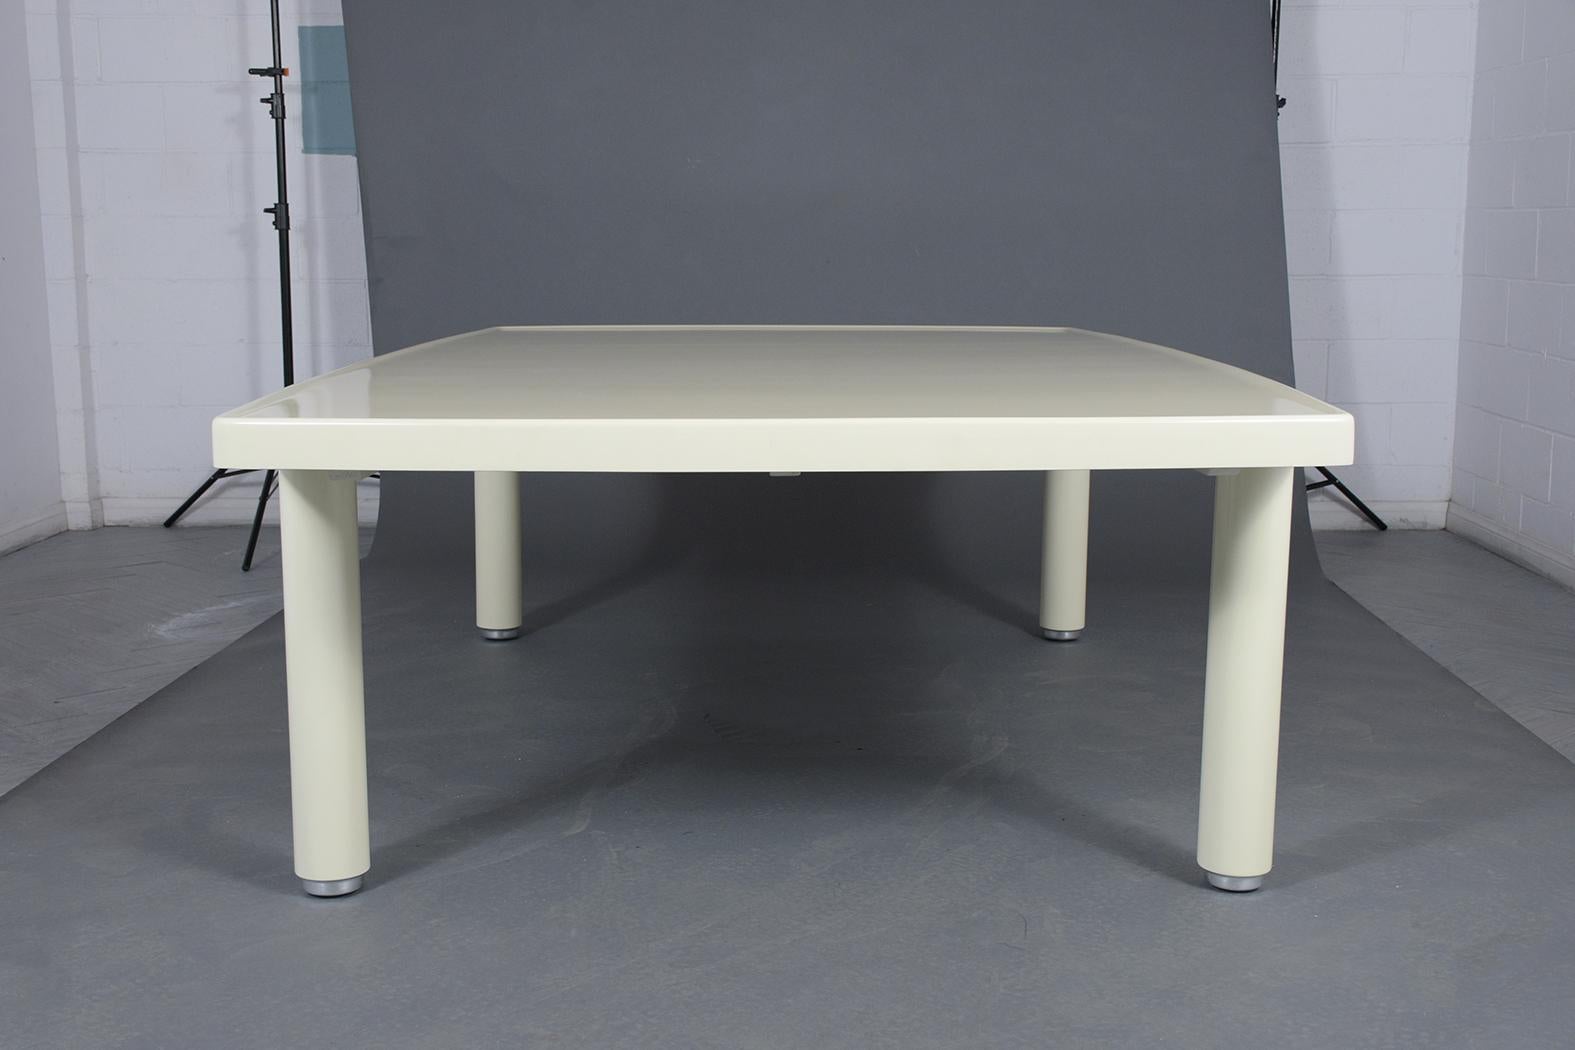 Stewart MacDougall Ivory Cream Dining Table with Silvered Leg Details For Sale 2